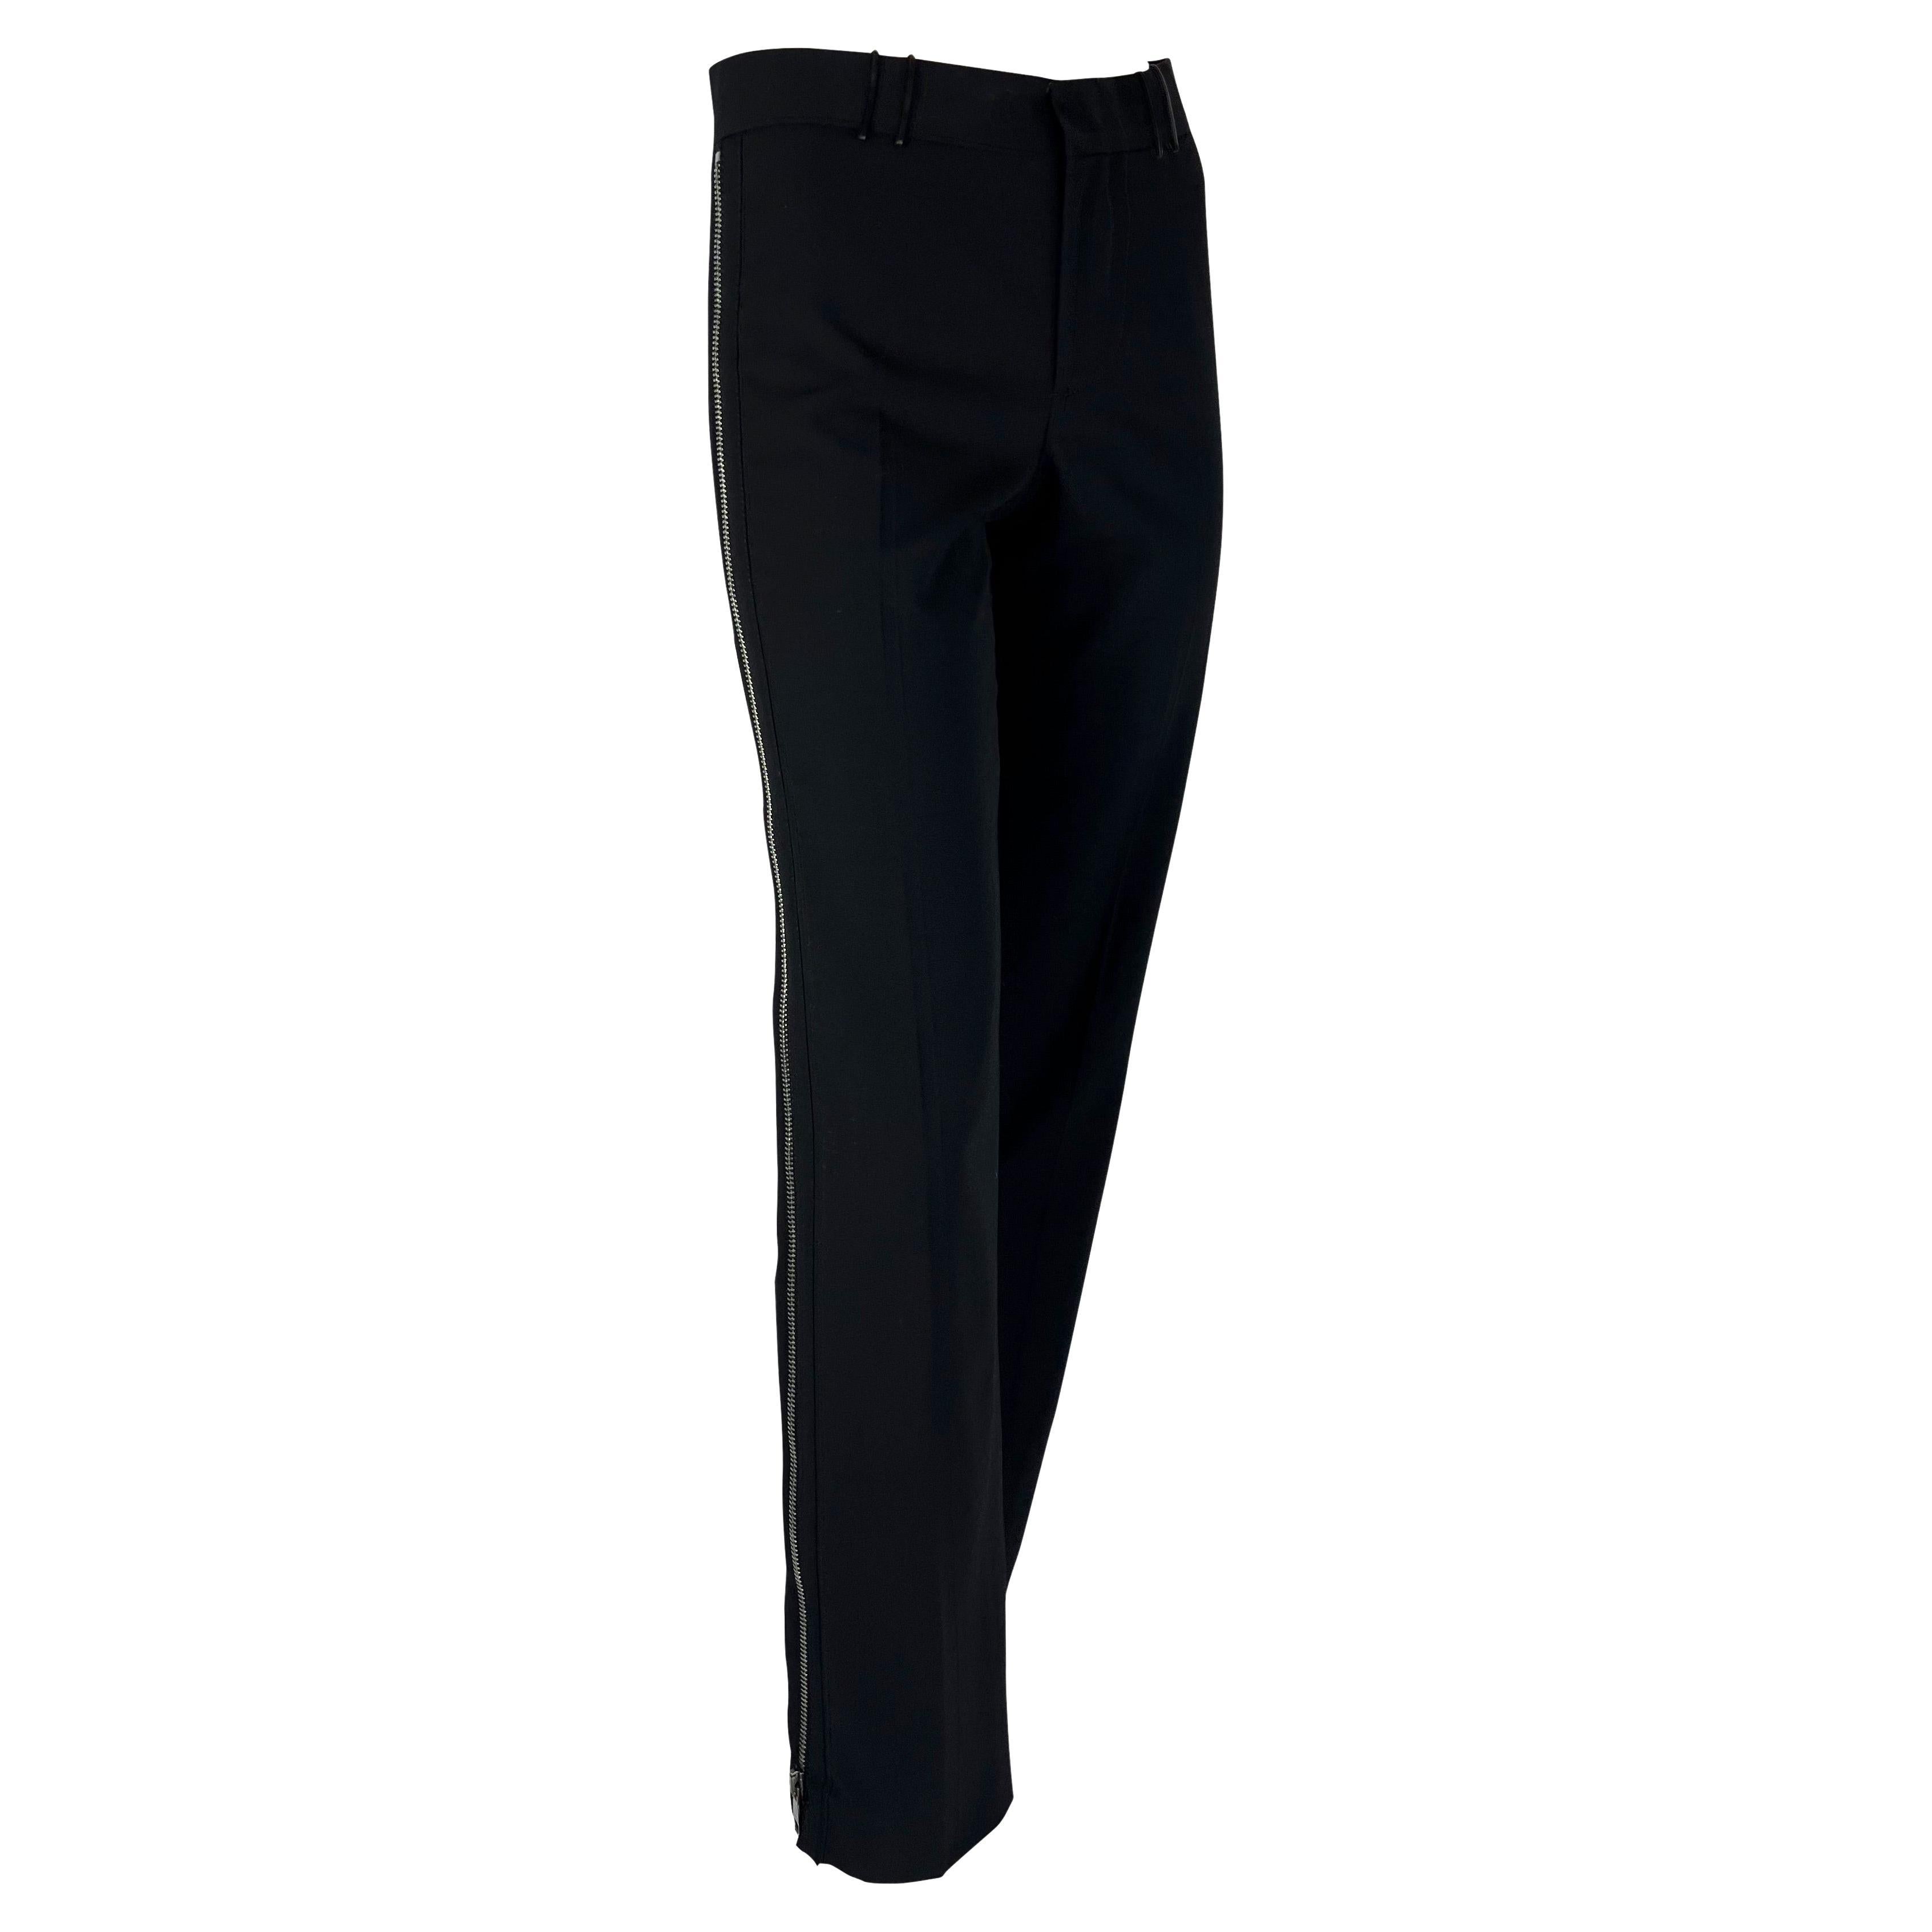 F/W 2001 Gucci by Tom Ford Runway Asymmetric Side Zip-Up Black Wool Pants For Sale 1